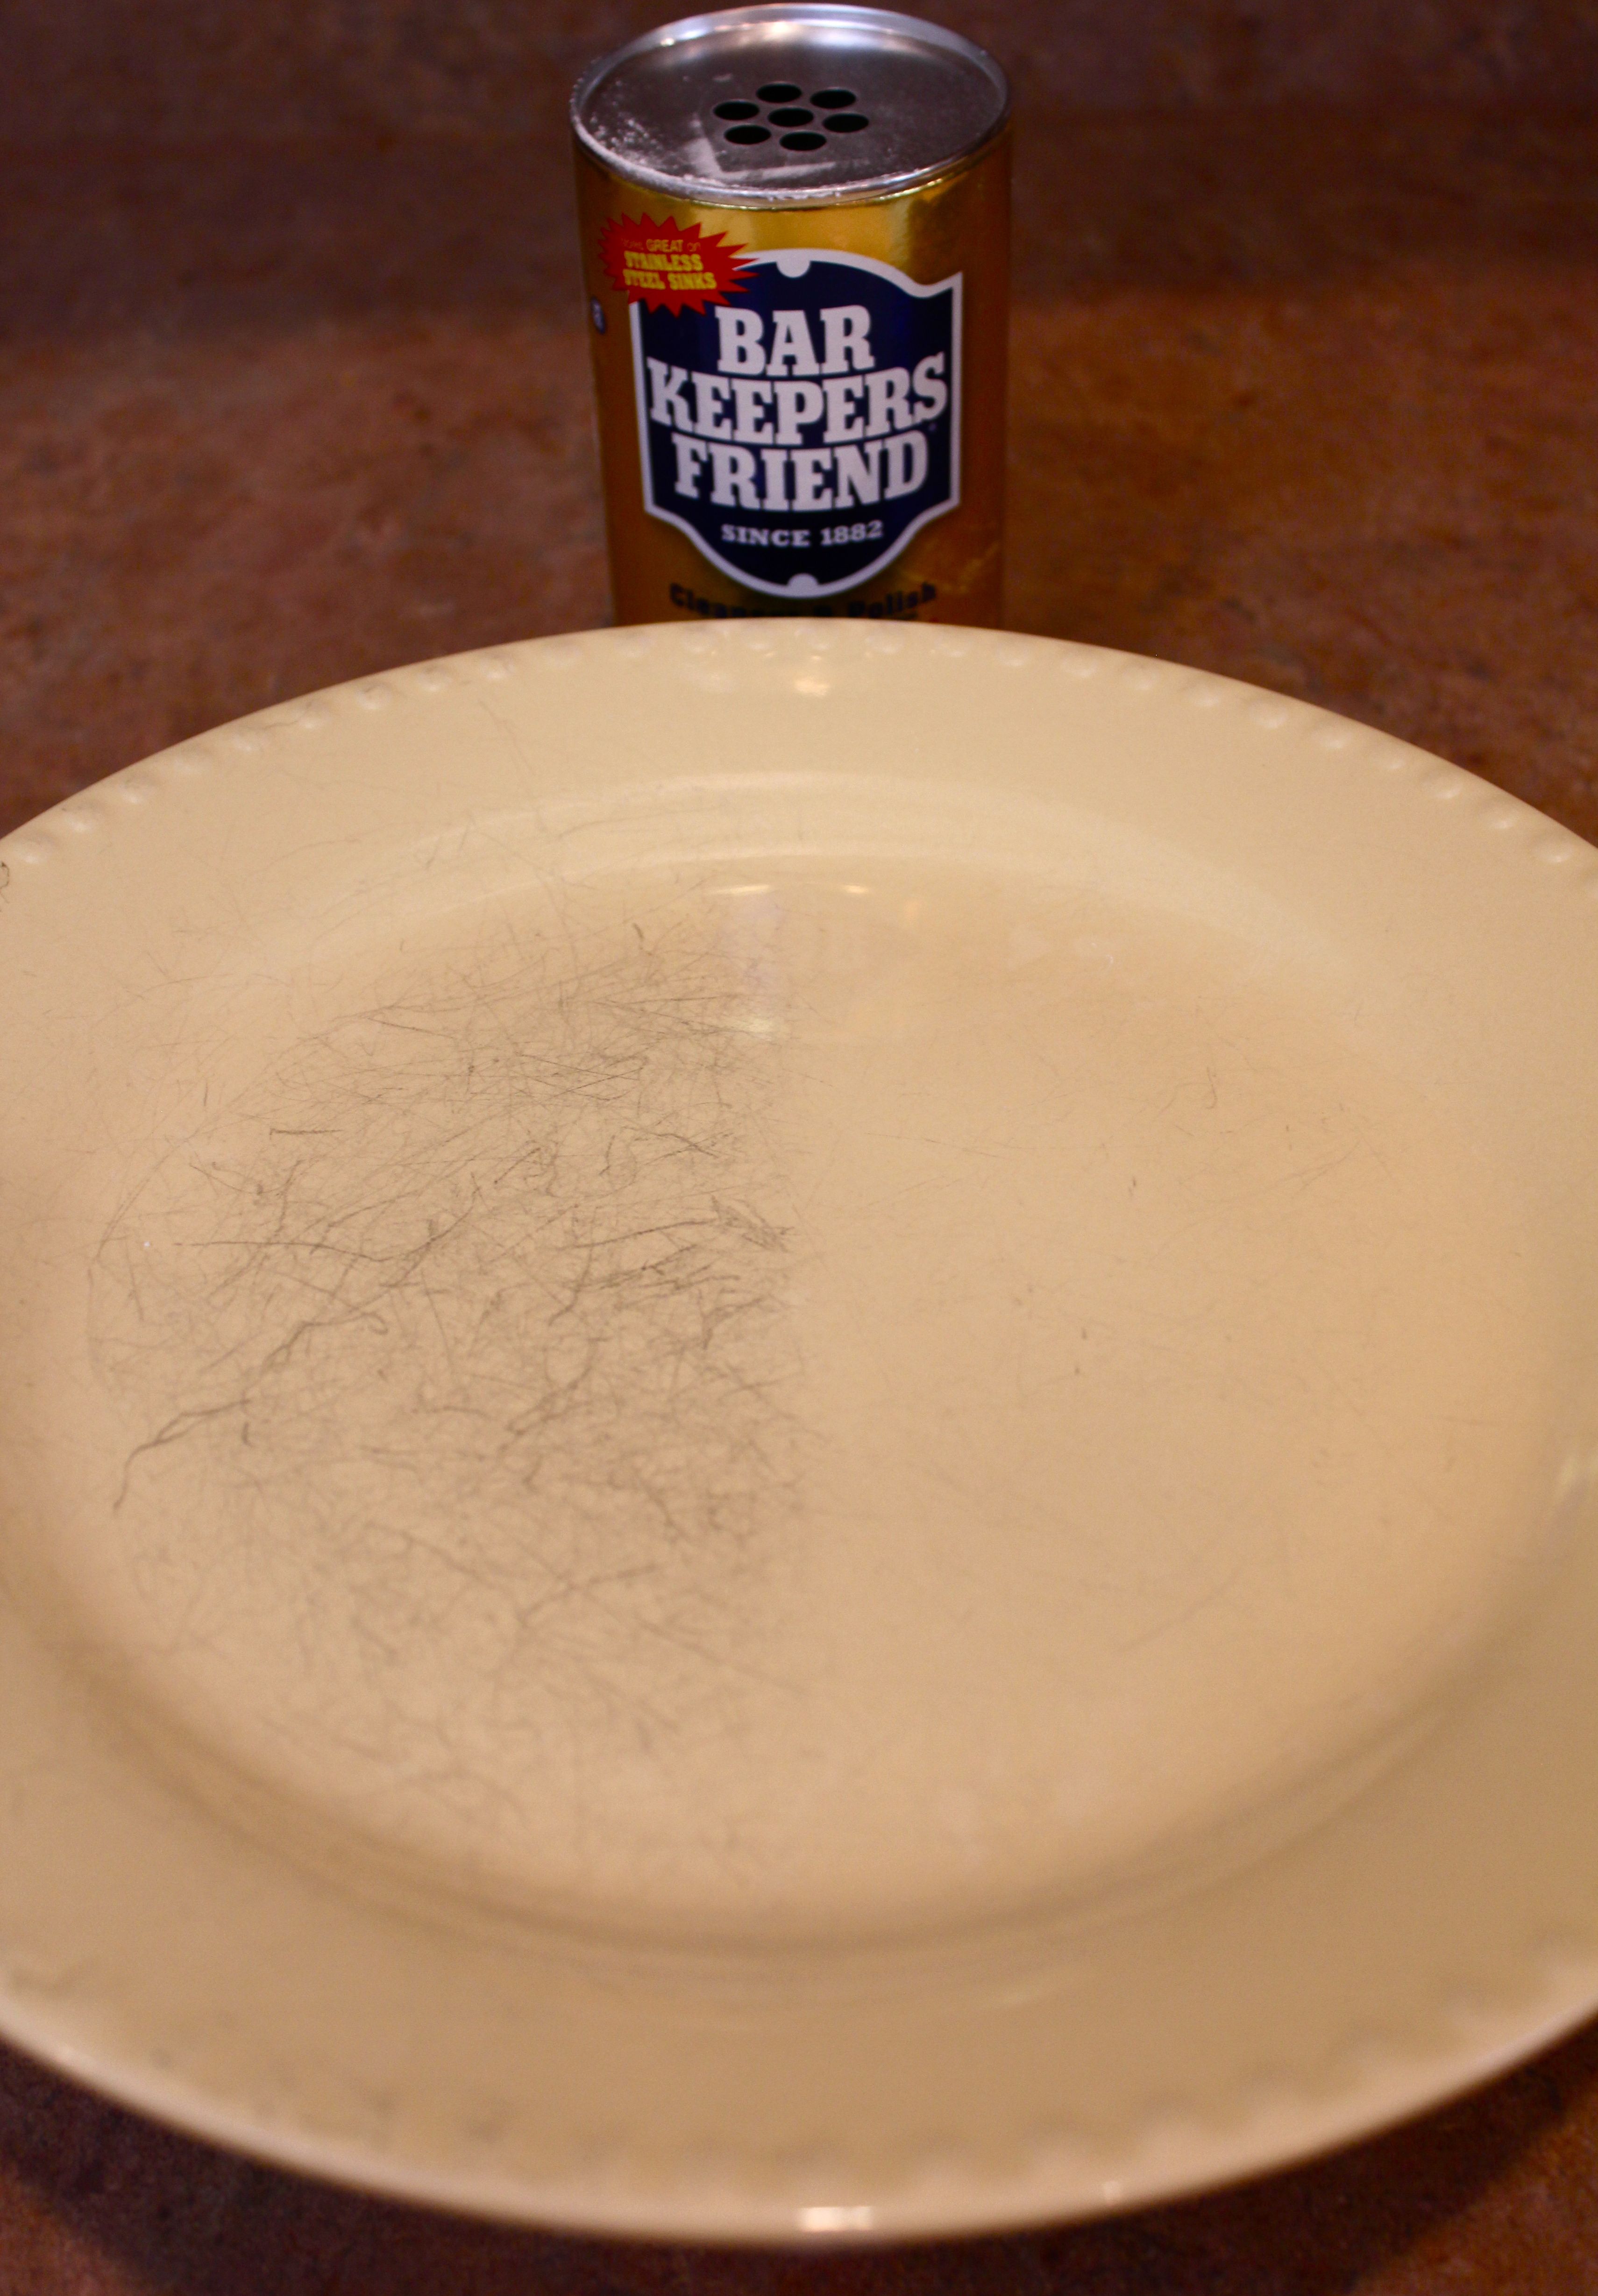 Check out how well Bar Keepers Friend worked!